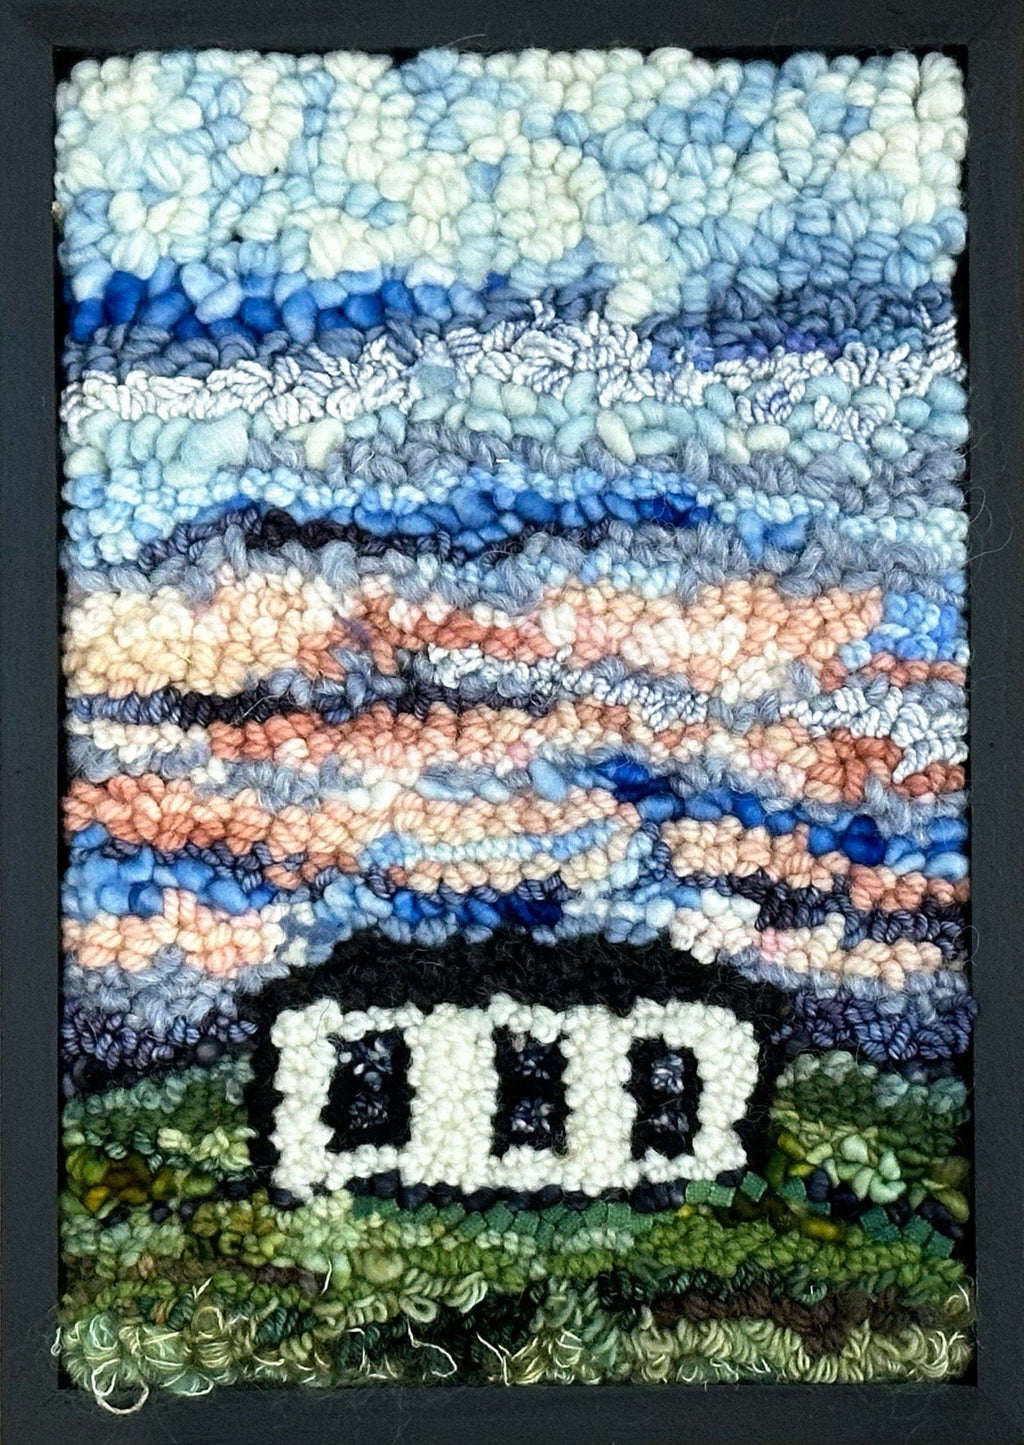 update alt-text with template Lone Sunset #3, 8.5" x 12" Framed-Rugs for sale-Deanne Fitzpatrick Rug Hooking Studio-Rug Hooking Kit -Rug Hooking Pattern -Rug Hooking -Deanne Fitzpatrick Rug Hooking Studio -Is rug hooking the same as punch needle?